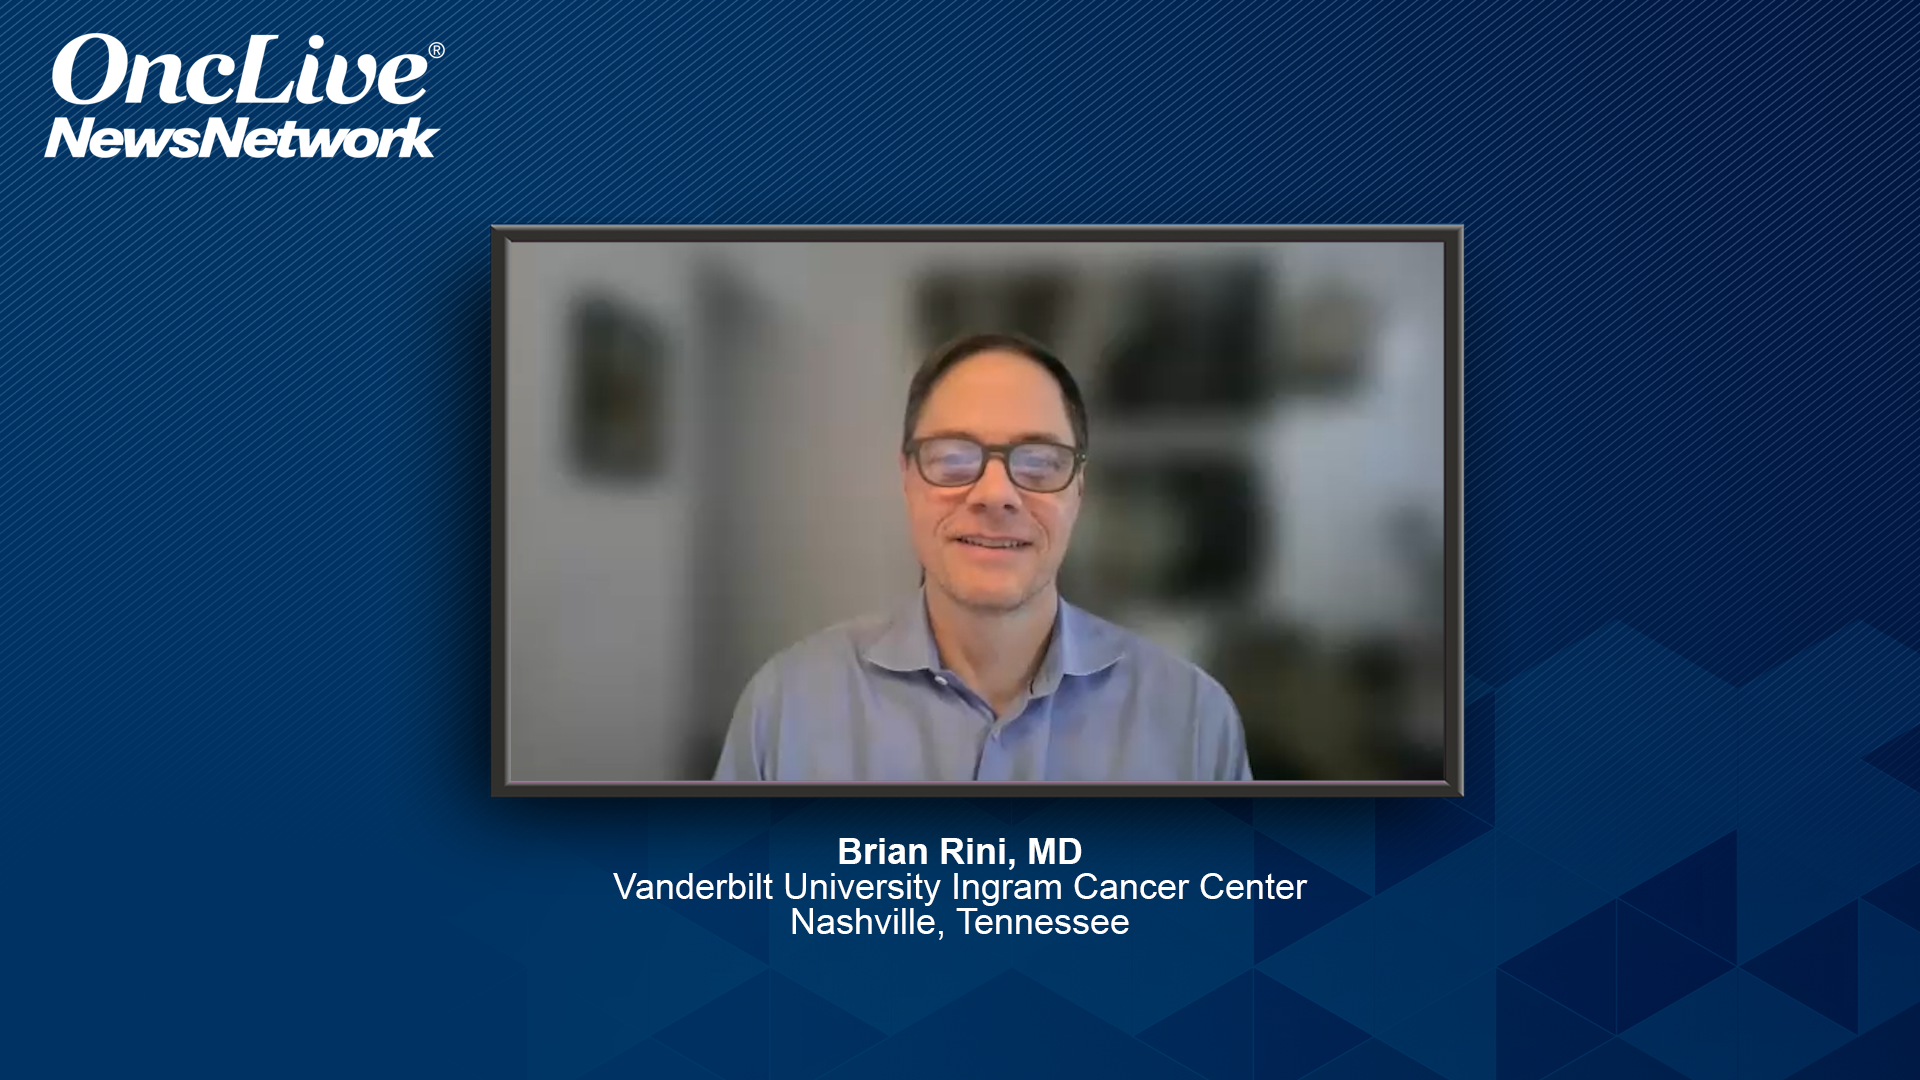 Brian Rini, MD, an expert on kidney cancer